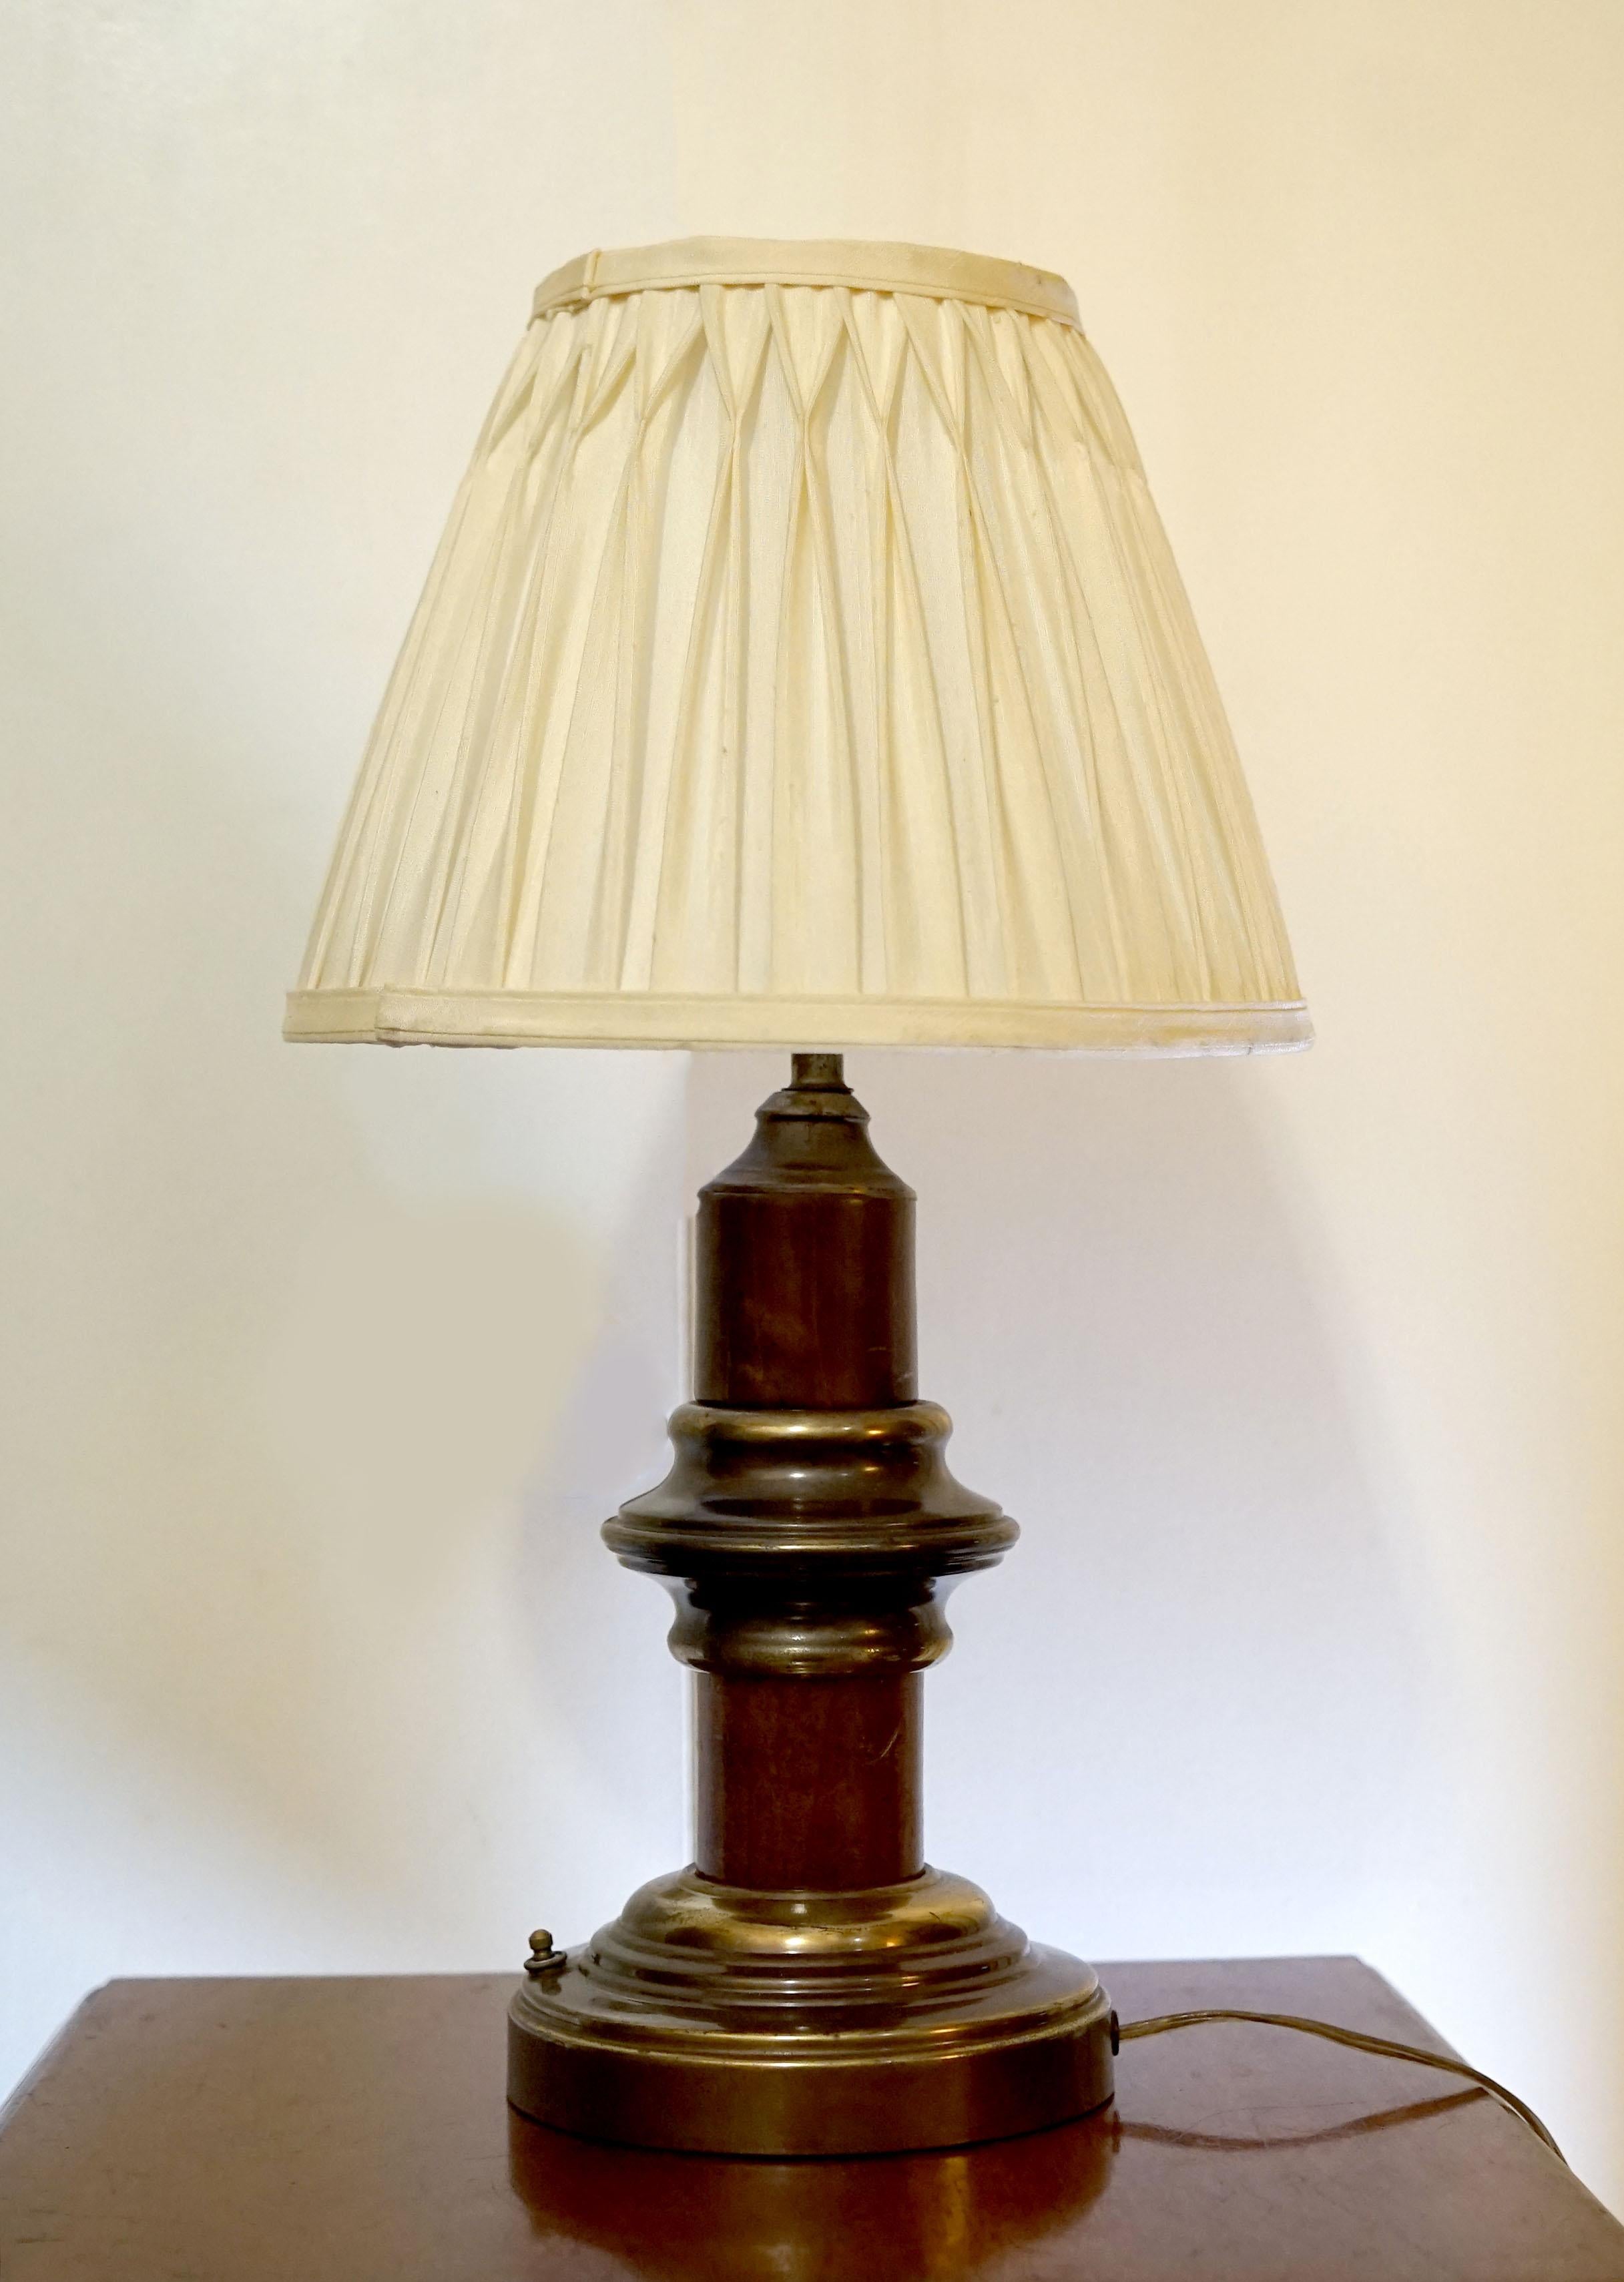 The contrast of deep wood tones and the brass base and middle section give this lamp a finished look. The brass patina is developed. This victorian style desk lamp is attractive for its compact form and original pinch-pleat lampshade among other